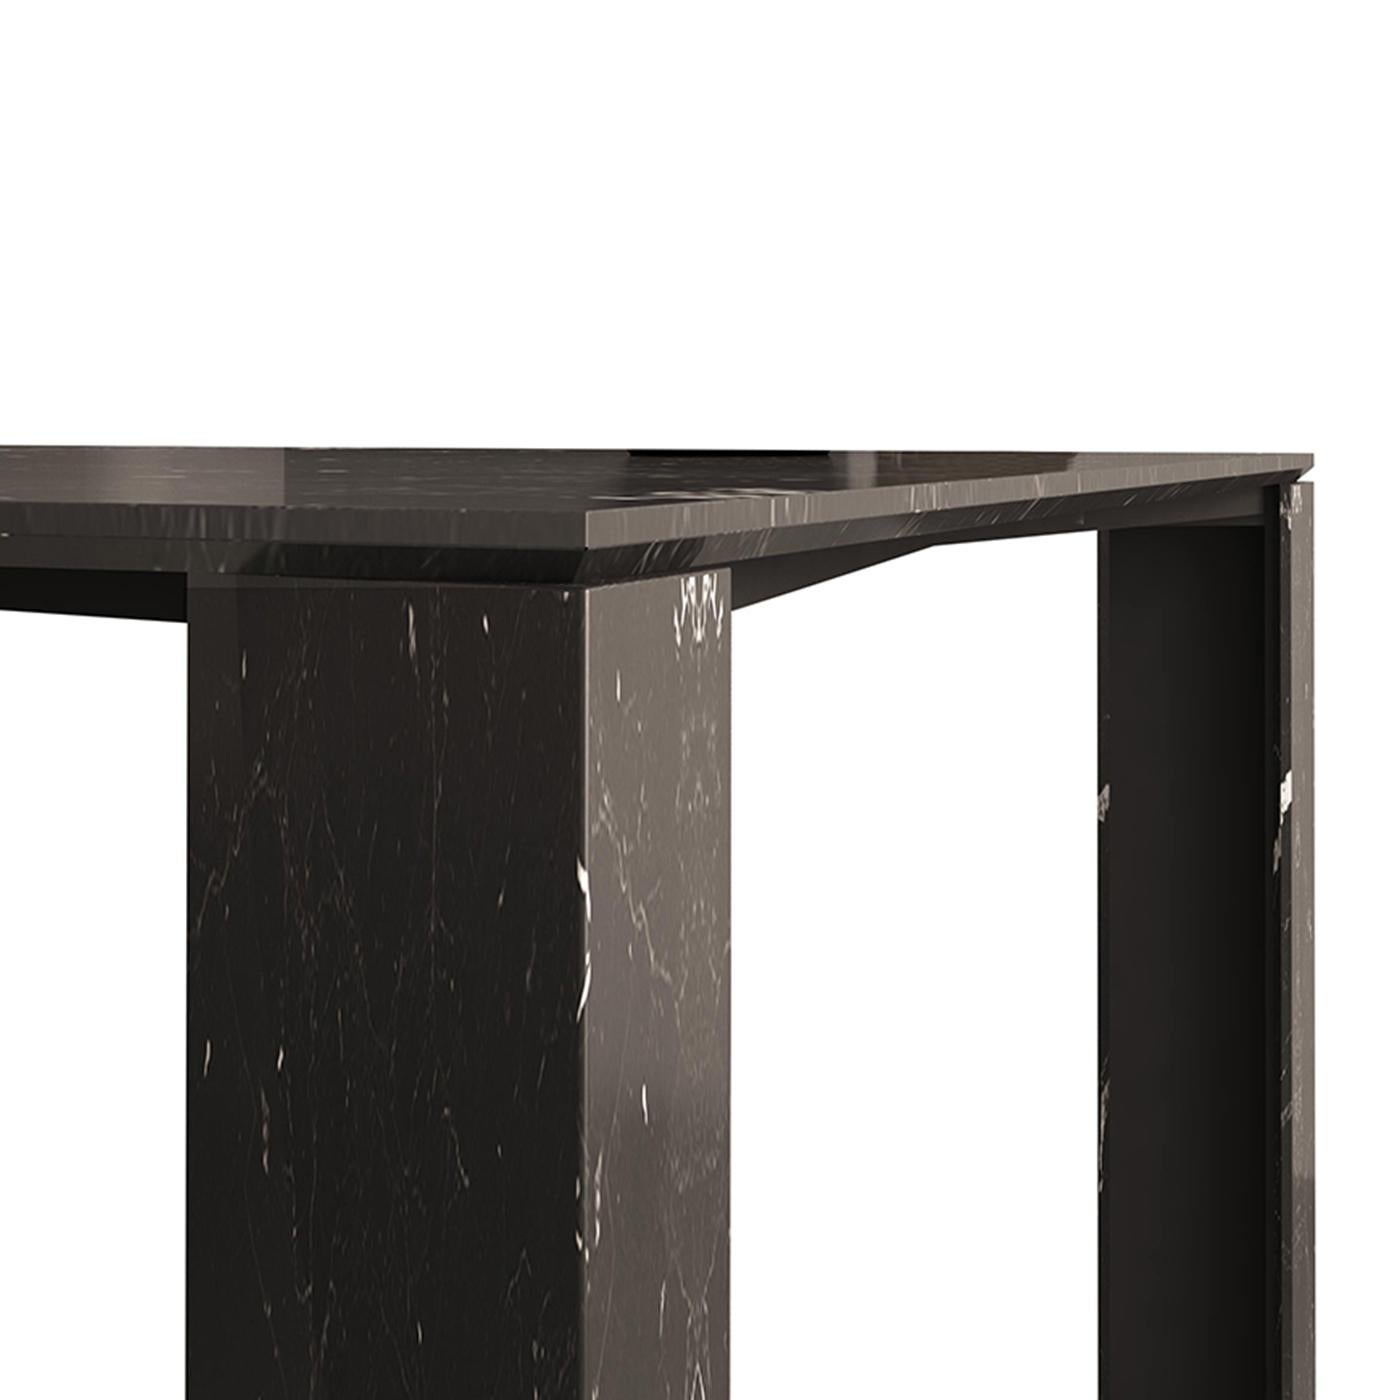 This superb dining table is a sculptural masterpiece of strong visual impact in a contemporary home. Its frame is in black-finished steel, supporting the superb Kenya Black marble, also named Antique wood marble, an elegant precious stone with dark